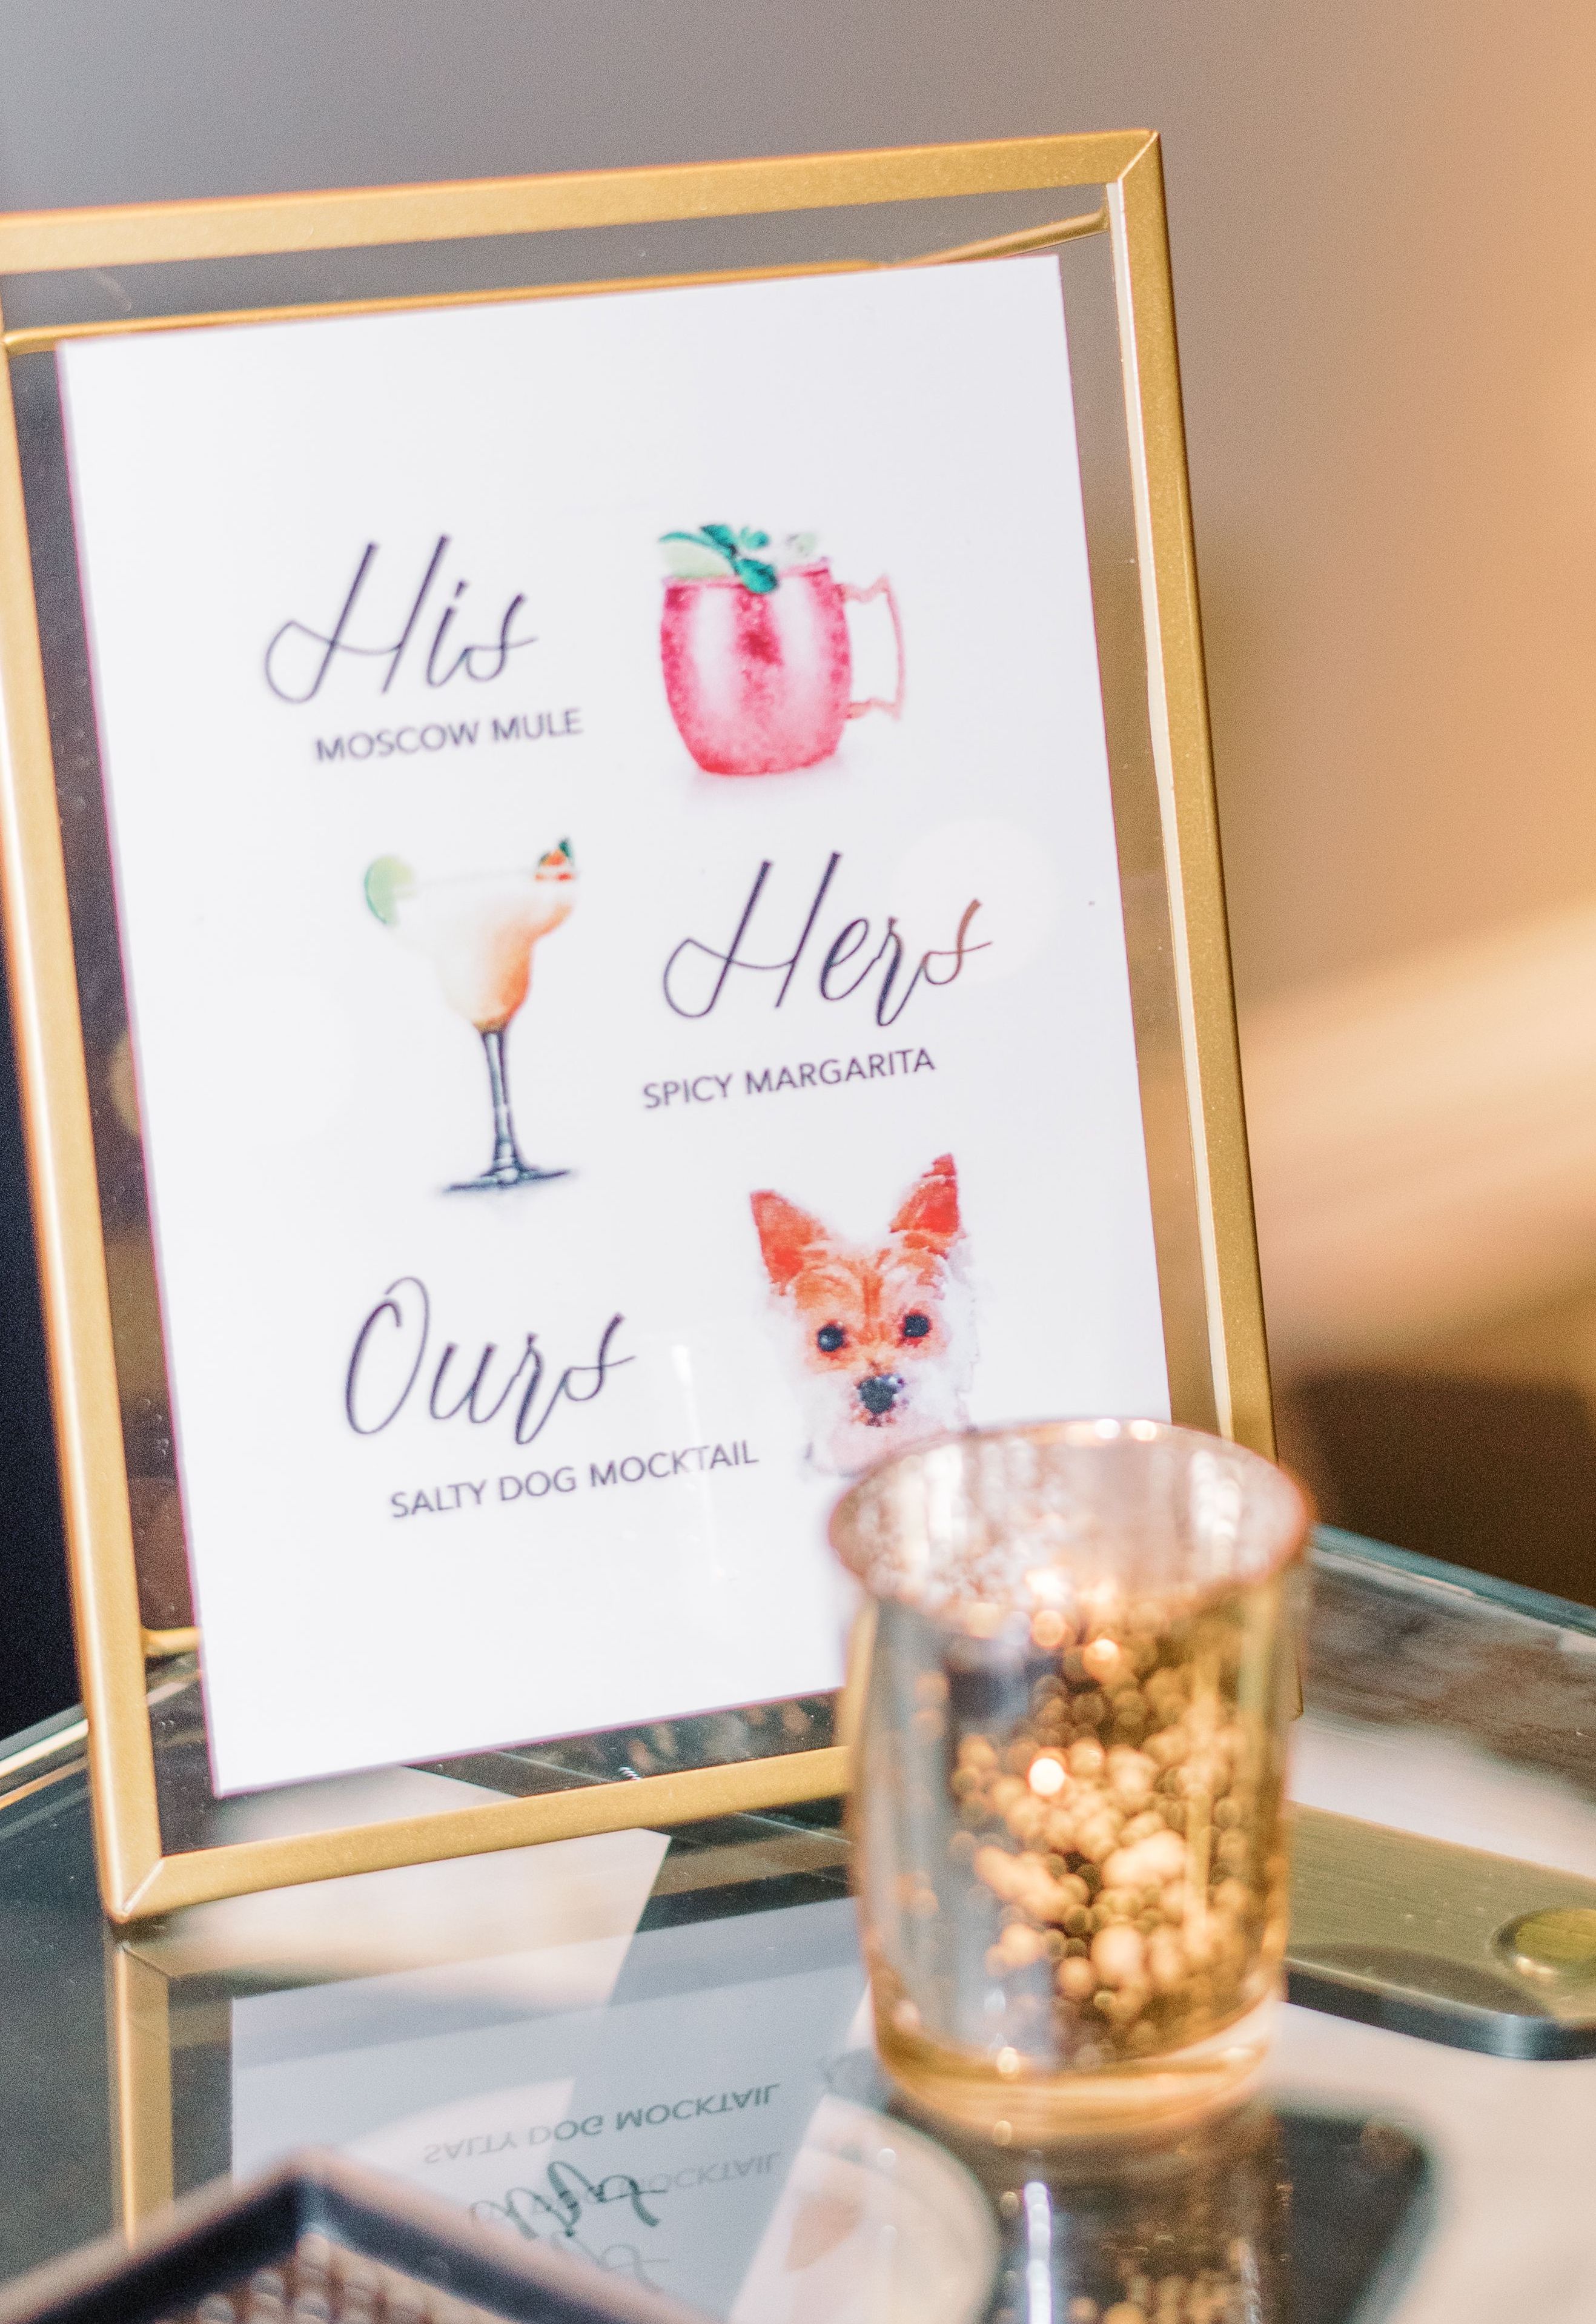 Wedding cocktail menu for the bride, groom and their dog.